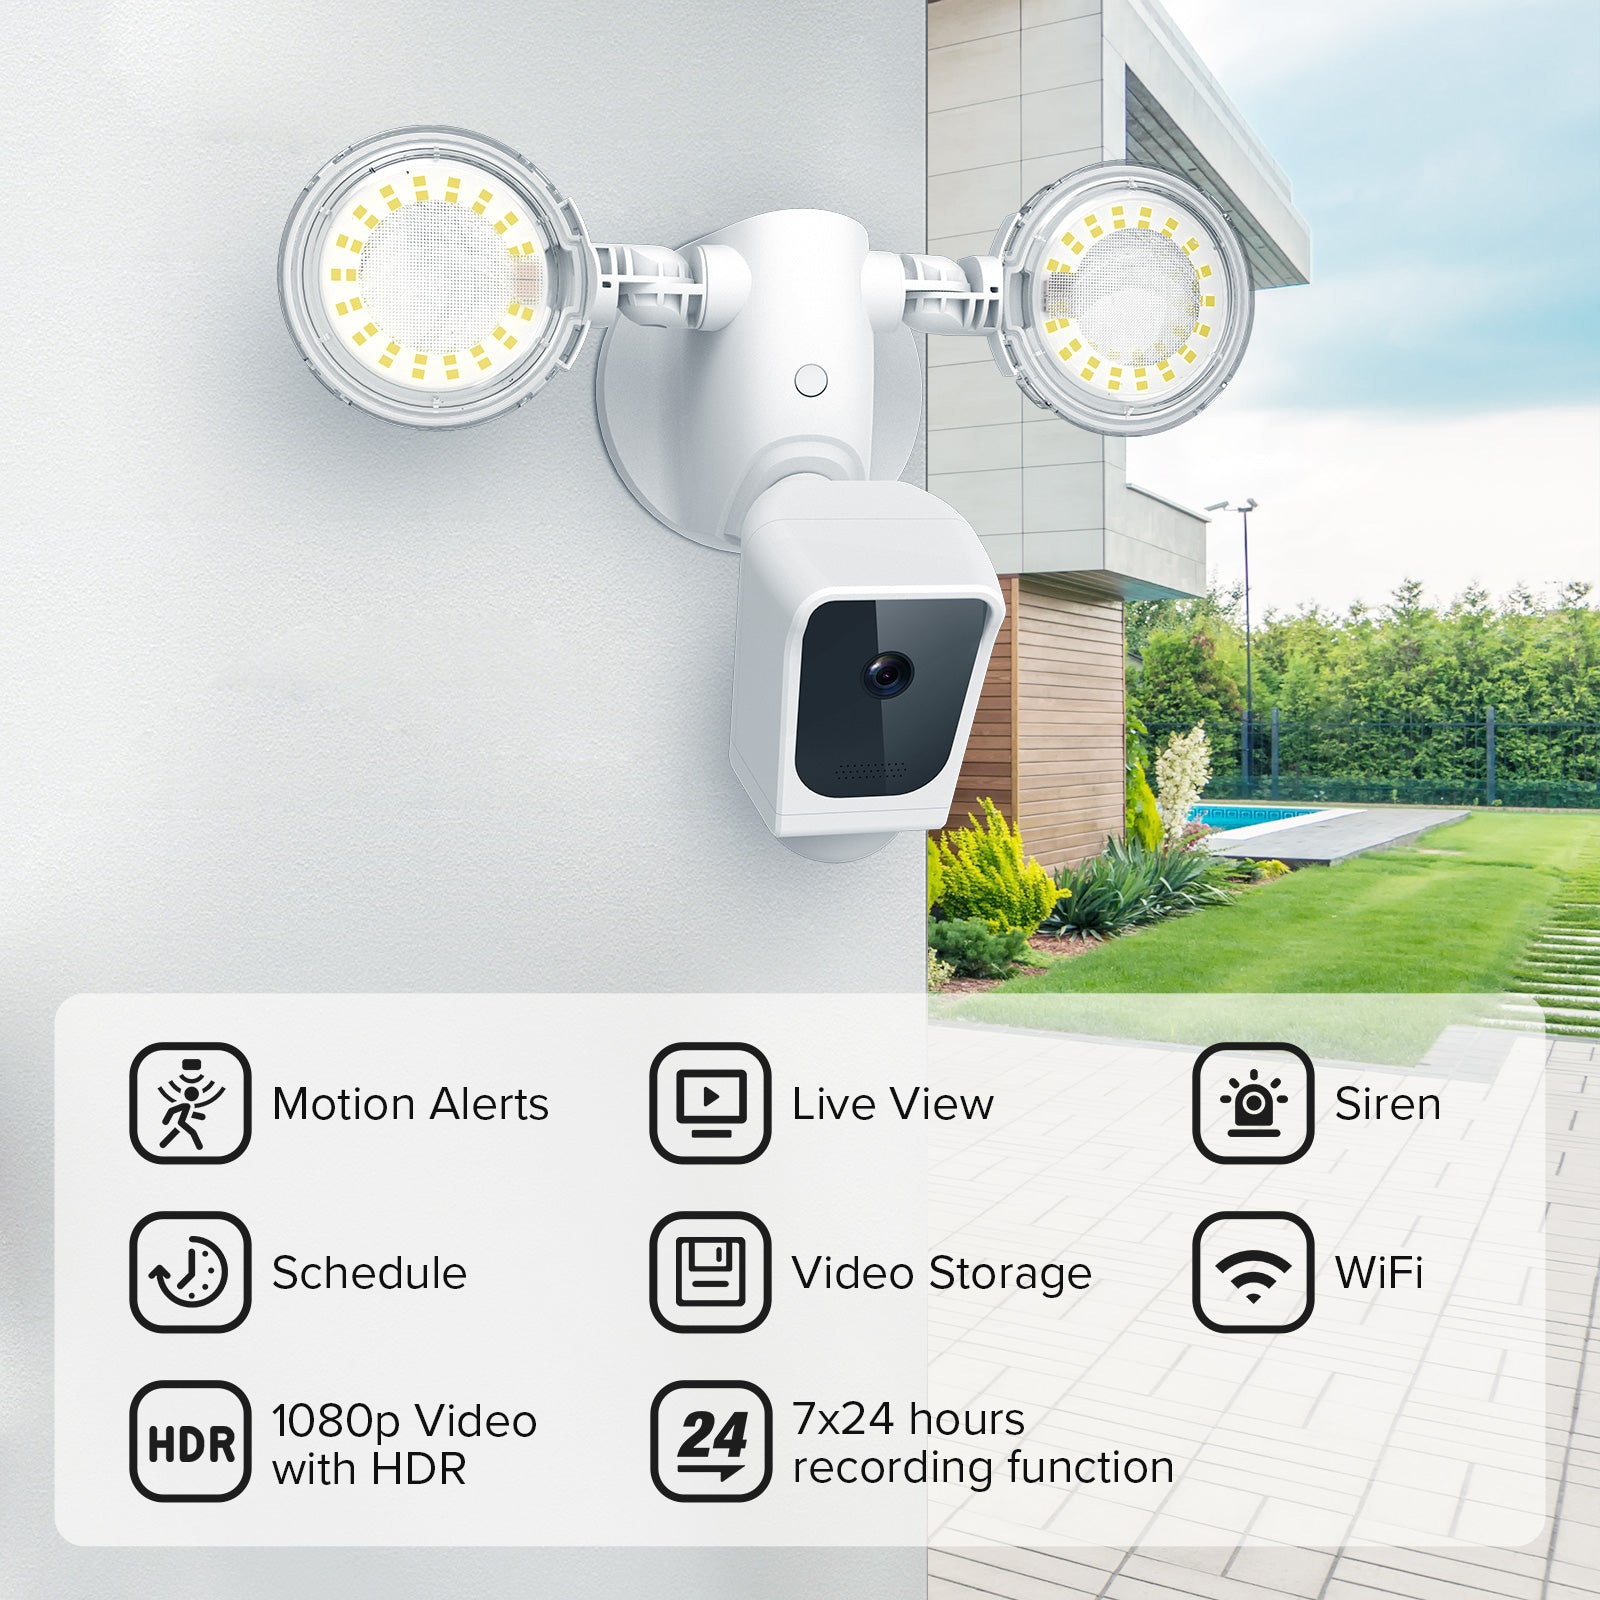 35W Smart Led Security Light (With Camera&Motion Sensor), live view, siren, schedule, video storage, wifi, 180p video with HDR, 7*24 hours recording function